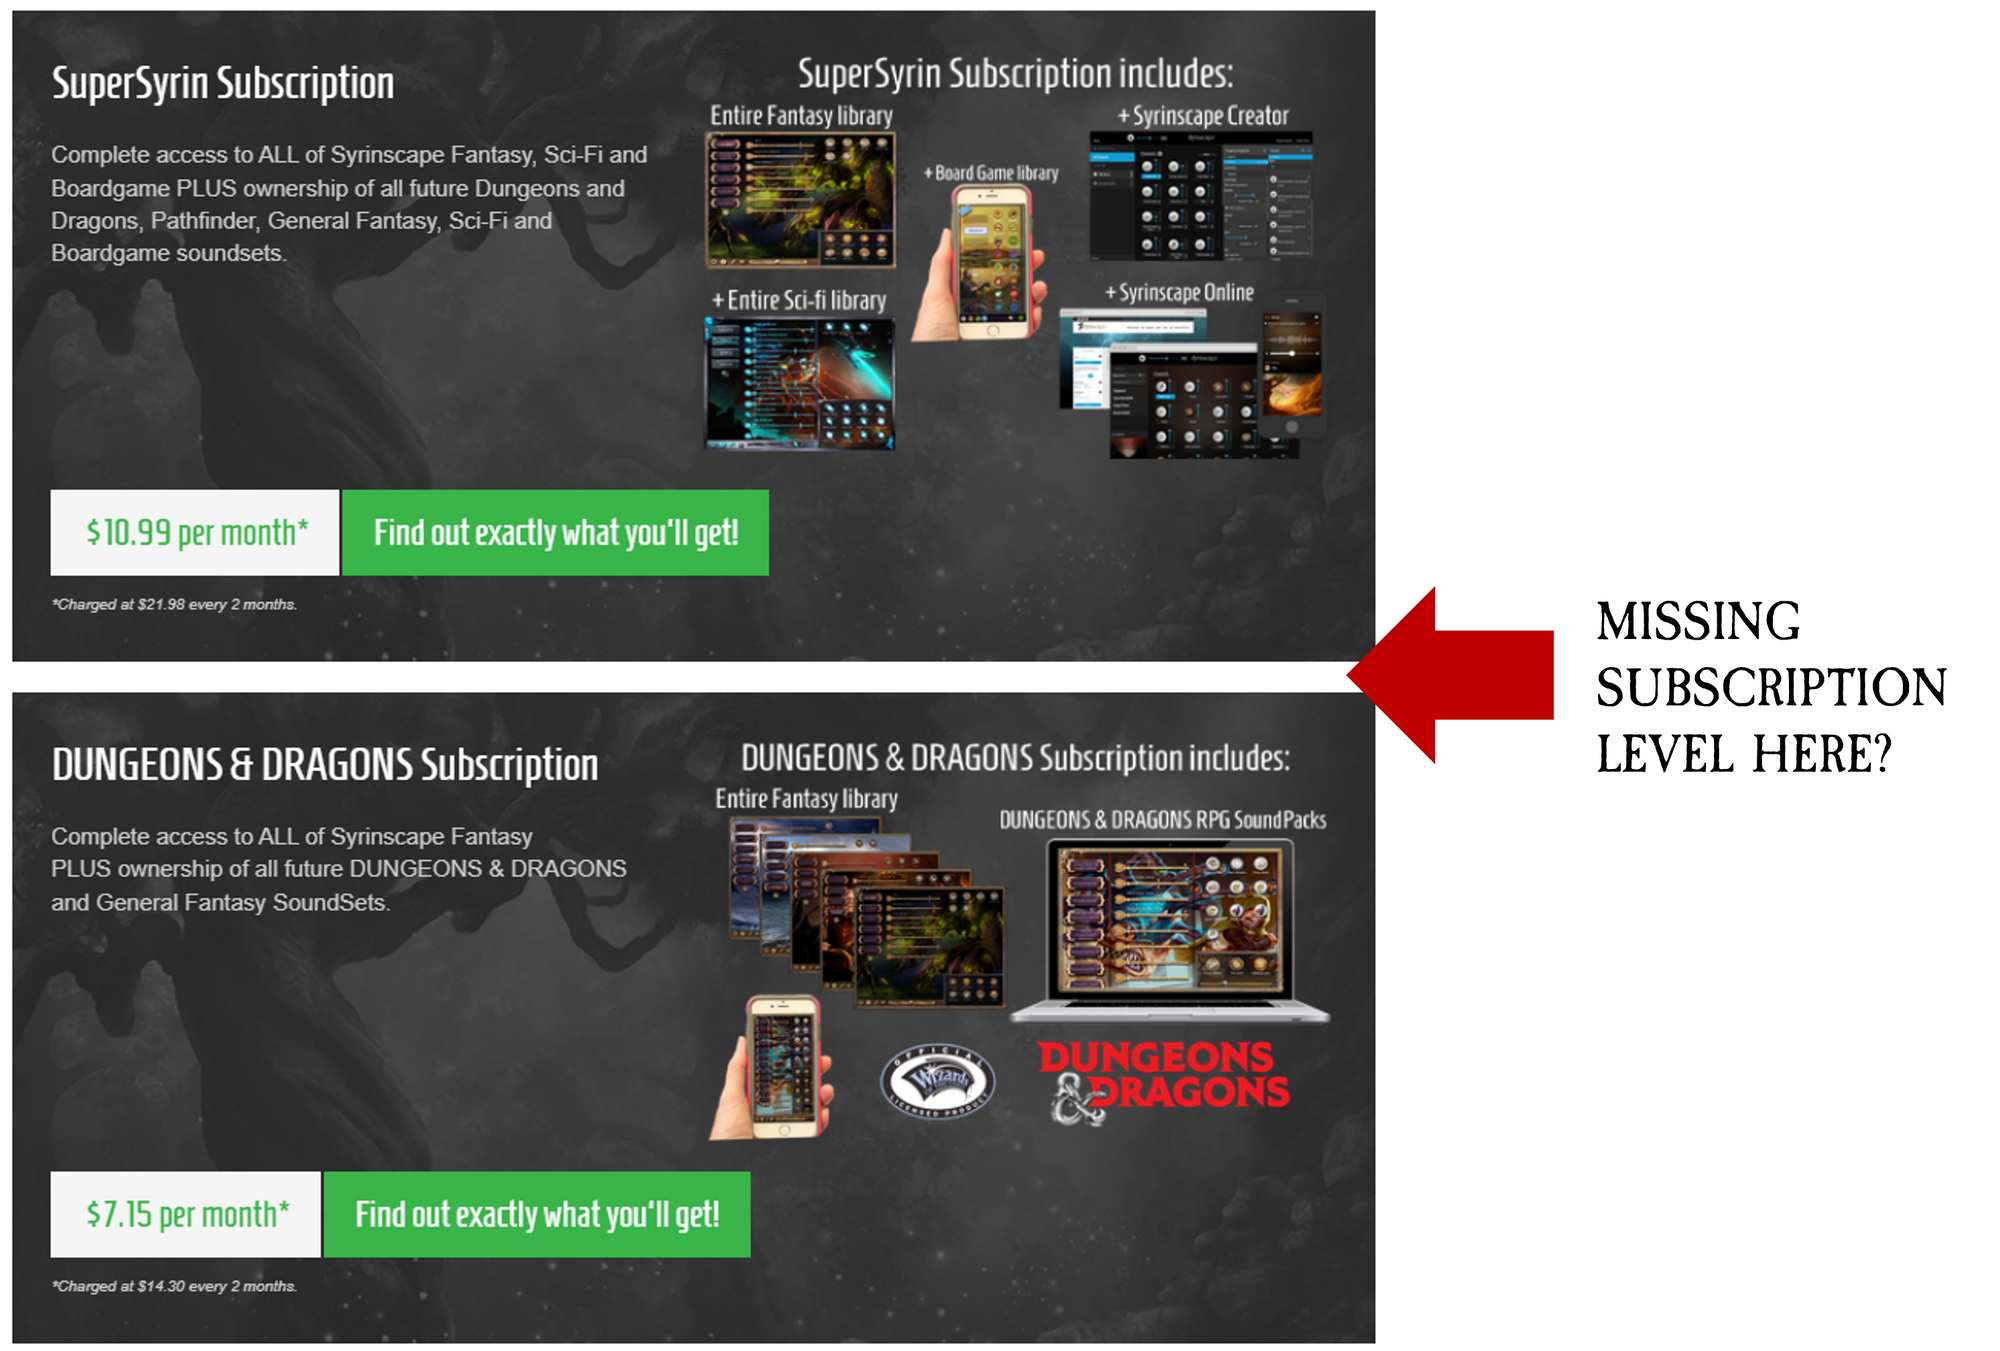 Screenshot of the Syrinscape website showing the subscription options